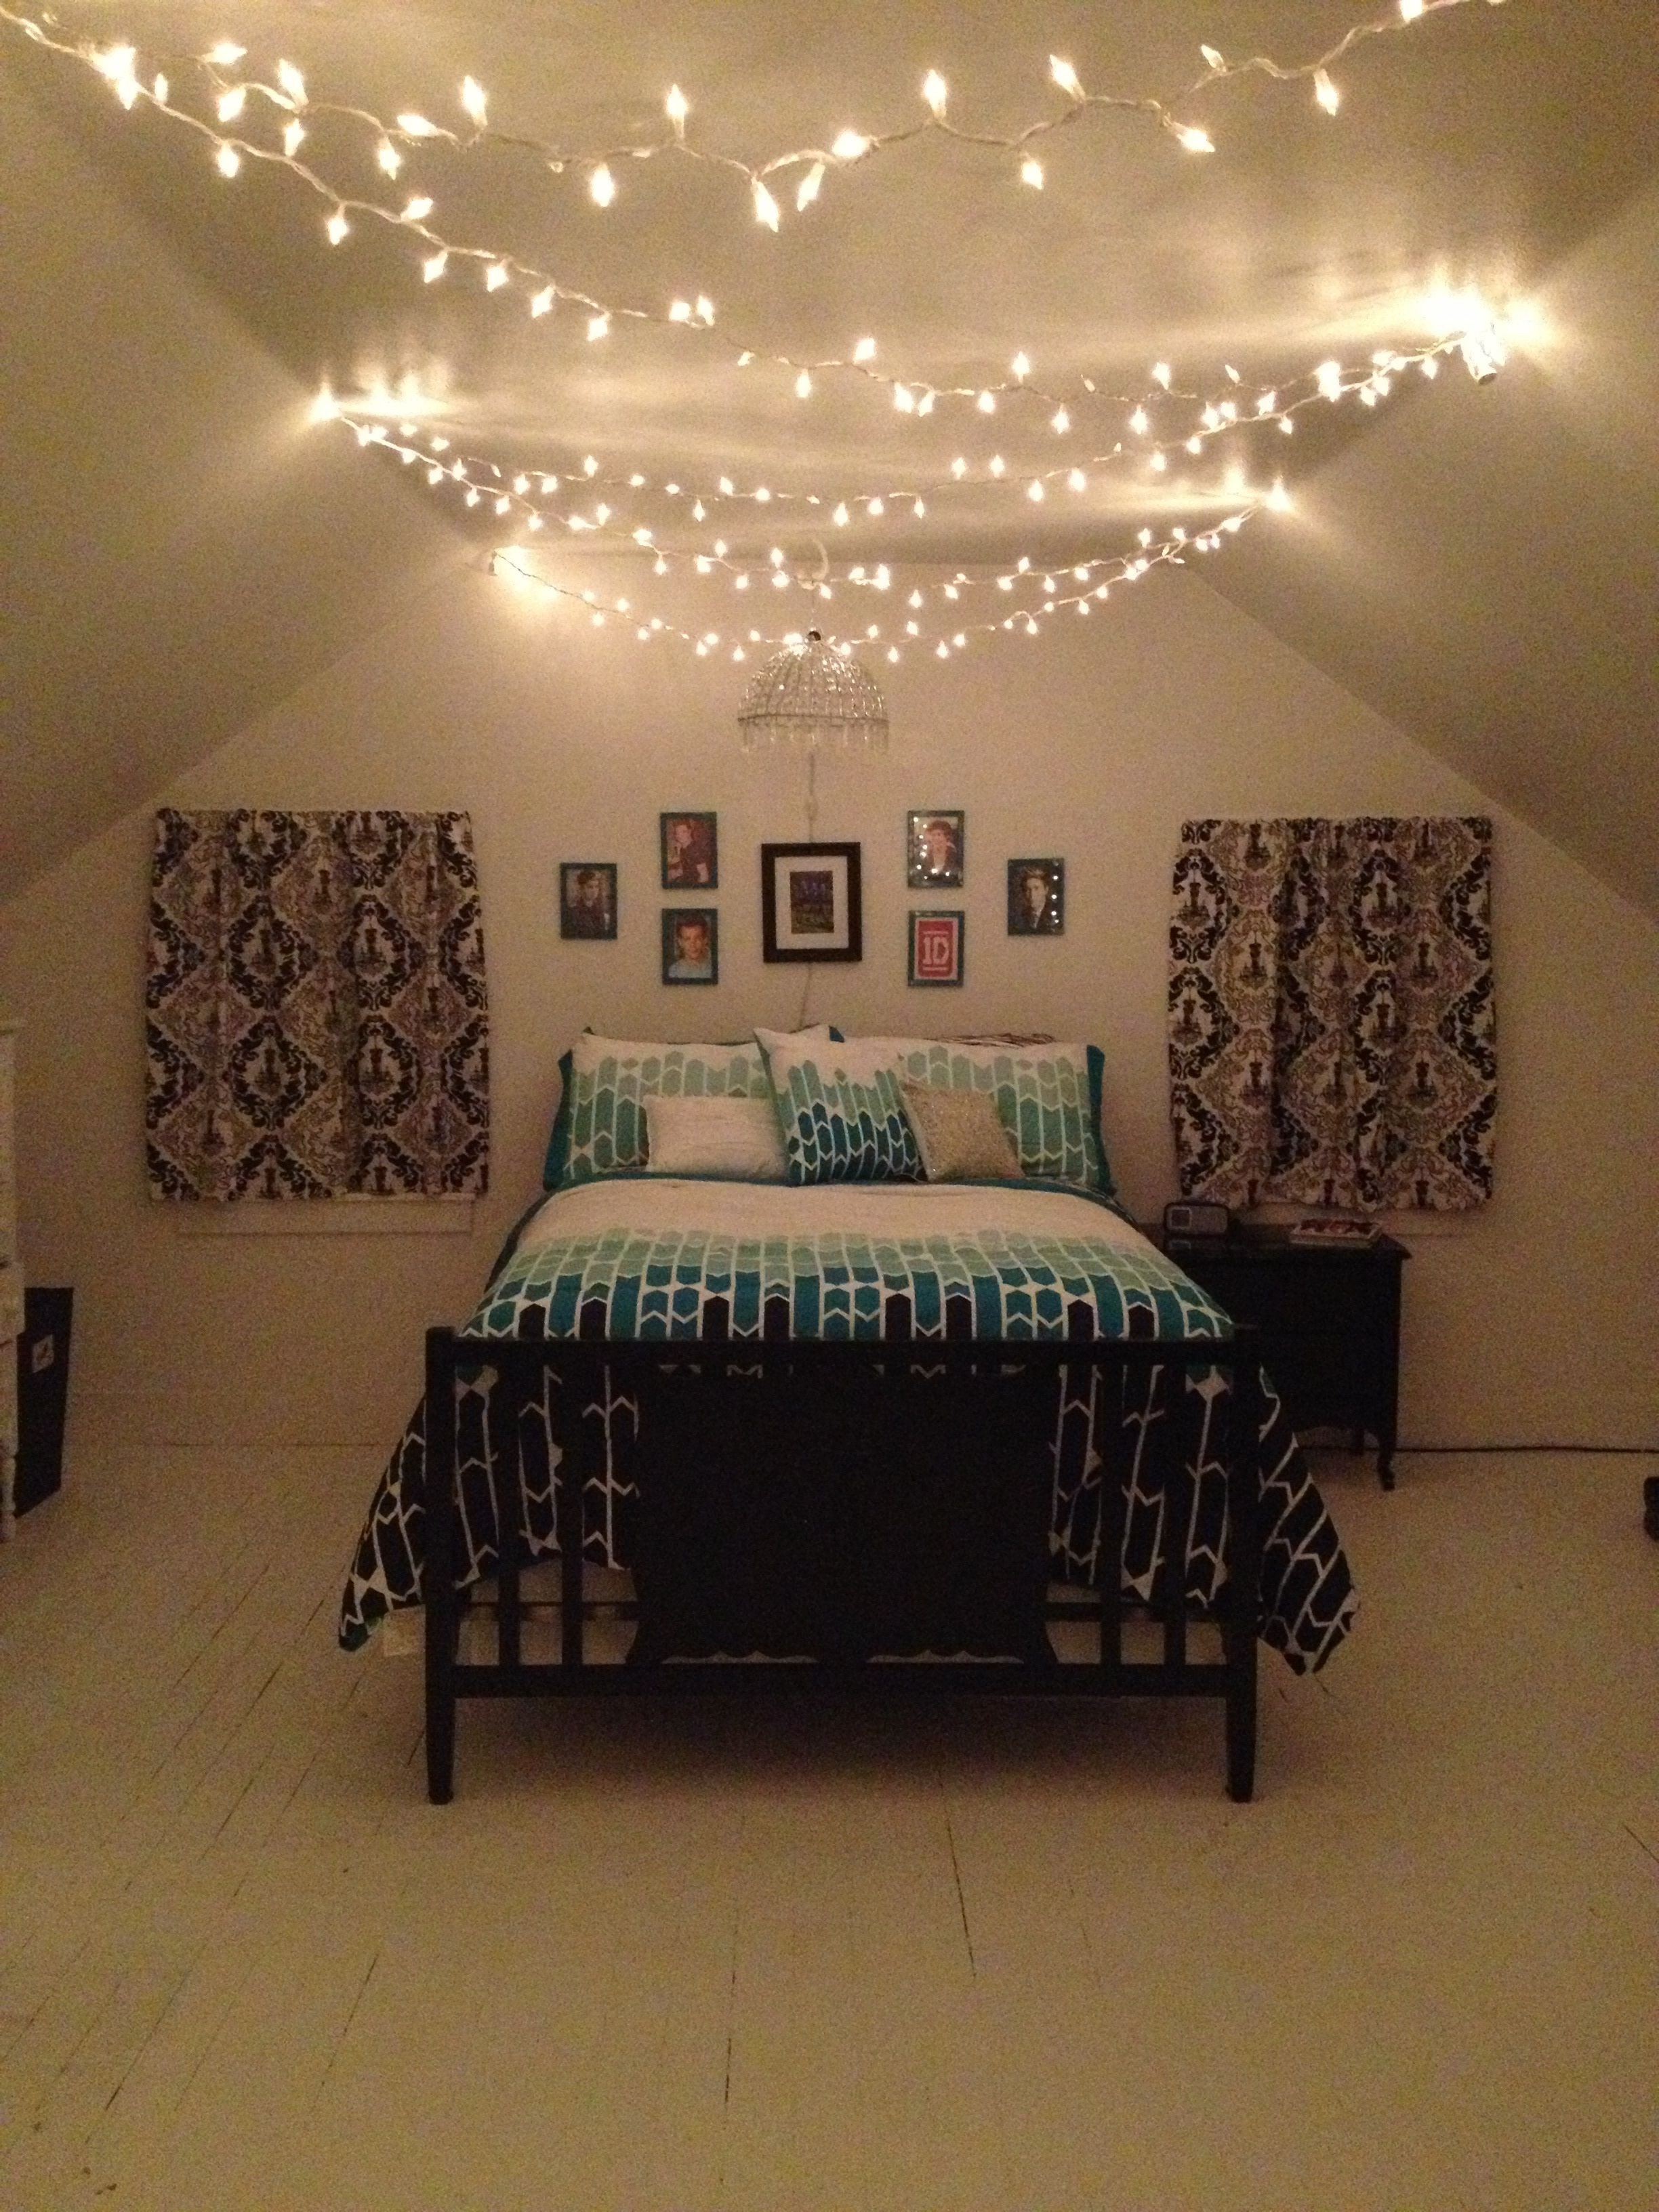 Christmas Bedroom Decorating Ideas Awesome Pin On Diy Room Decor